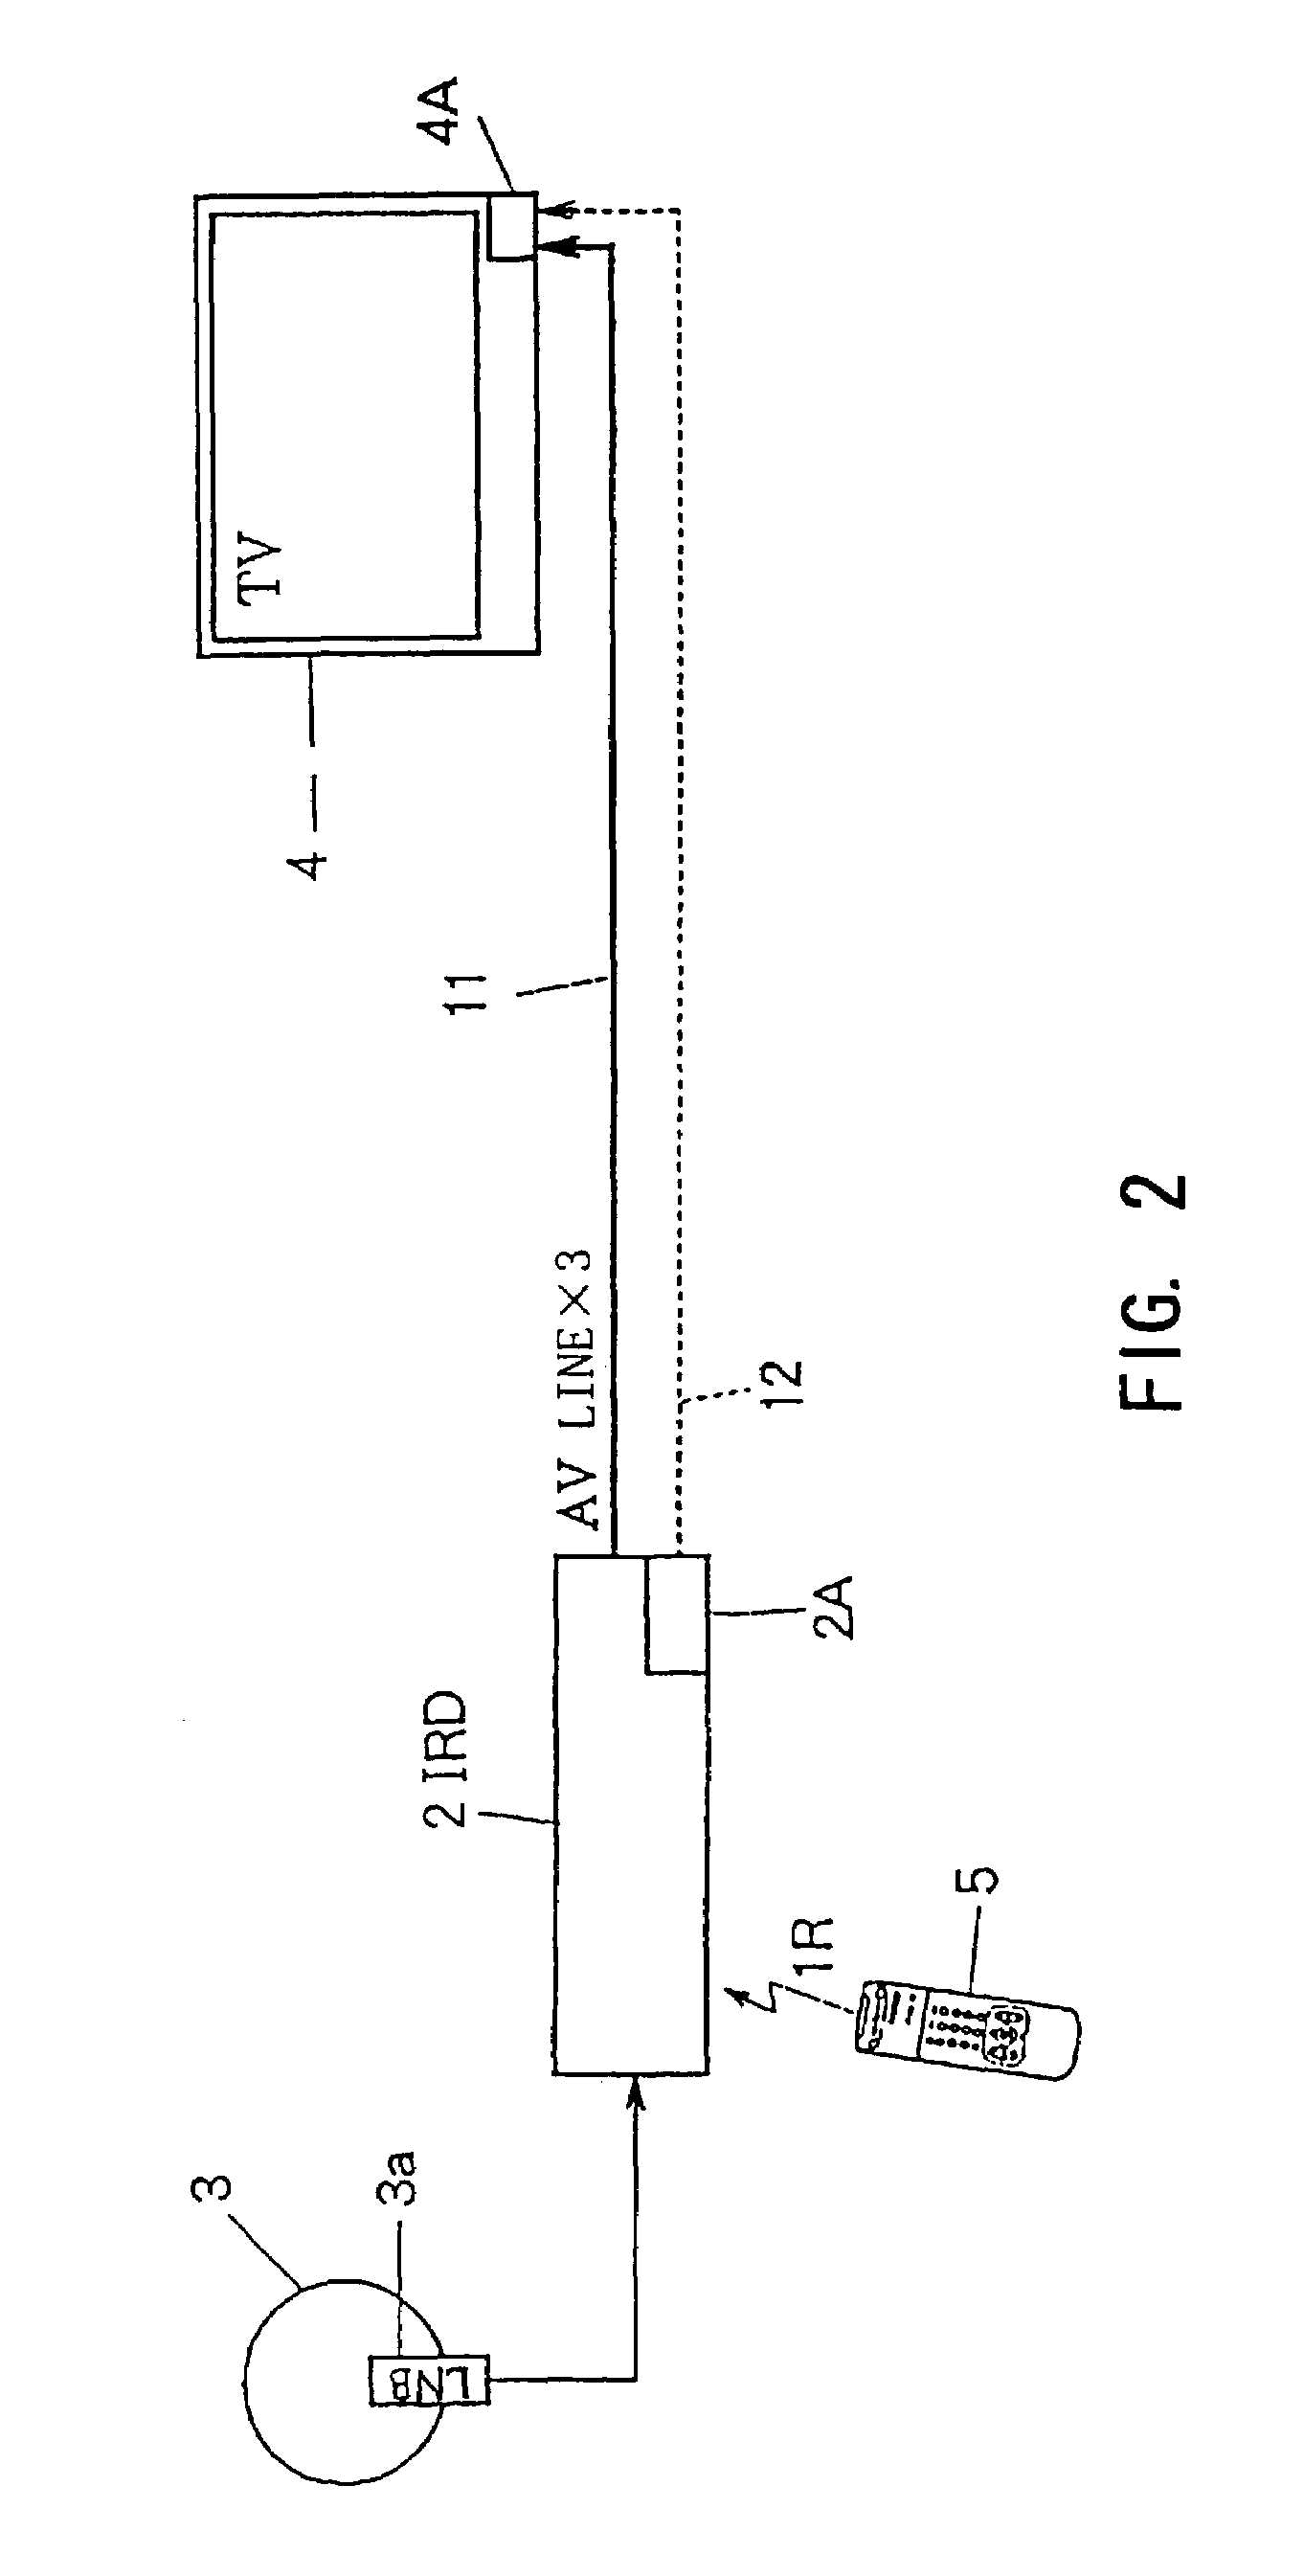 Program switching device and method